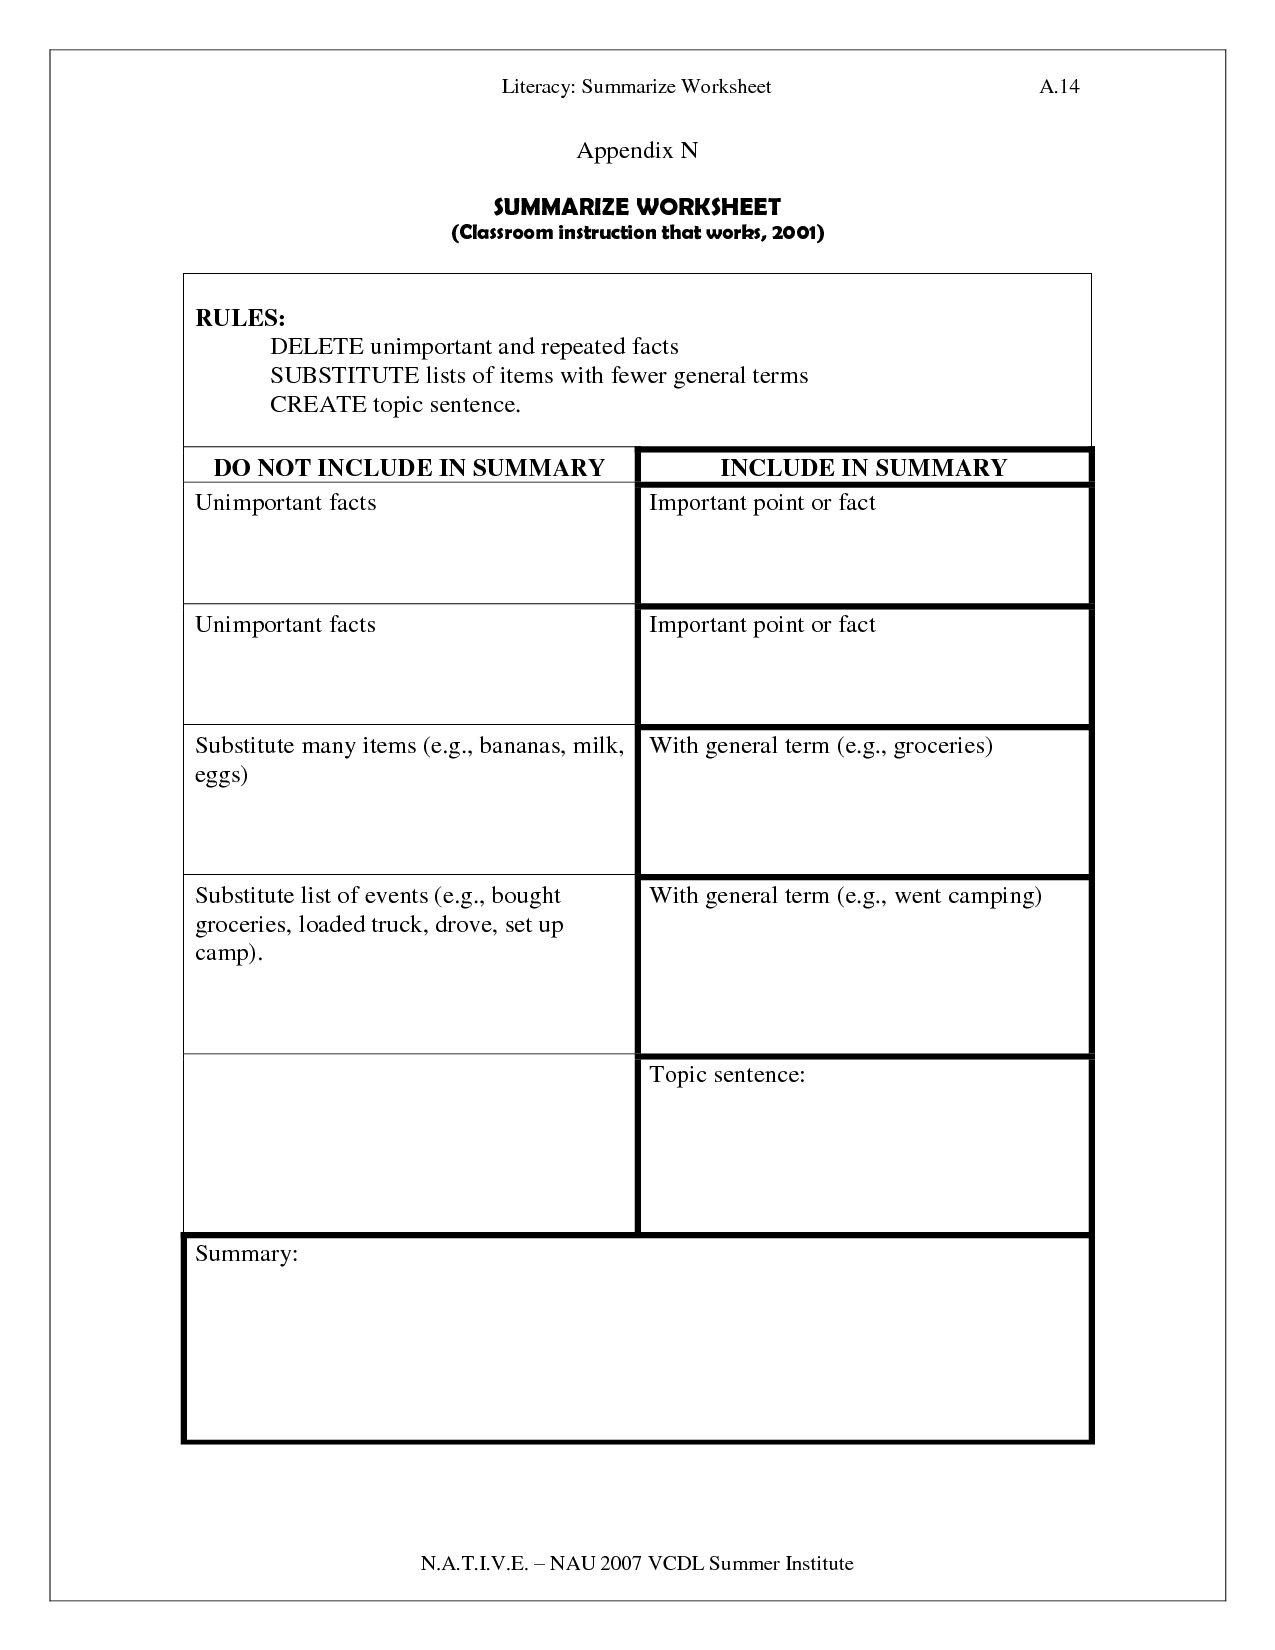 18-best-images-of-summarizing-paragraphs-worksheets-graphic-organizer-for-writing-a-summary-of